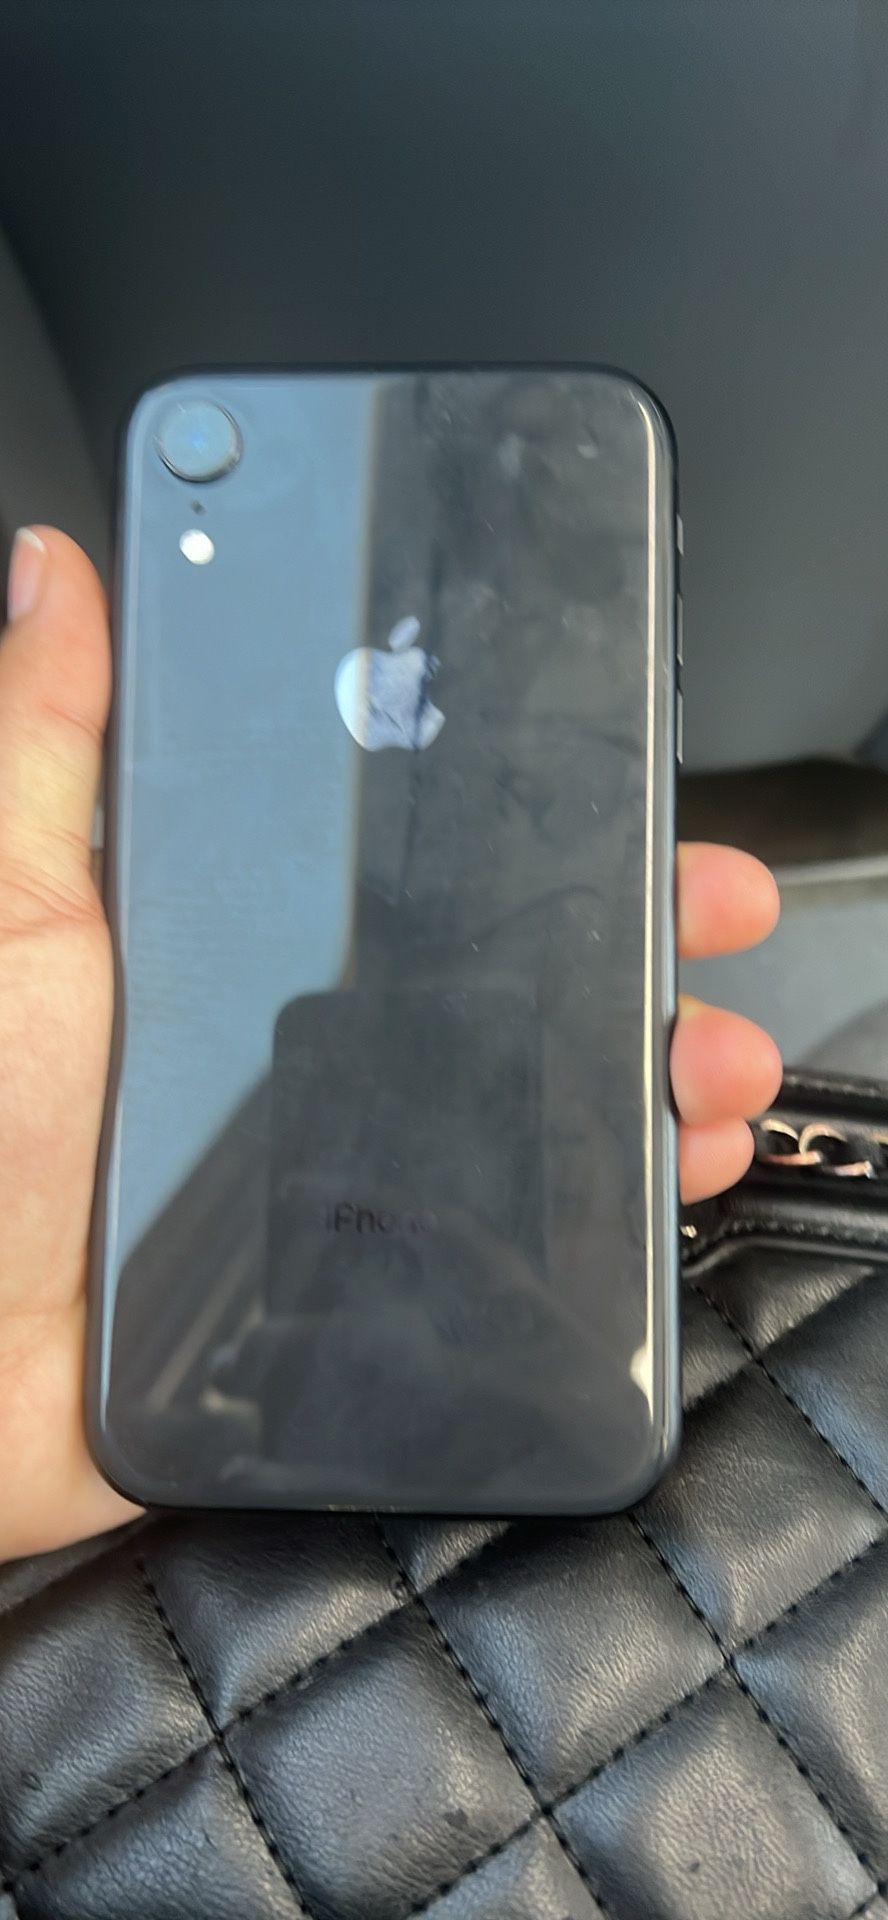 Iphone xr need gone asap